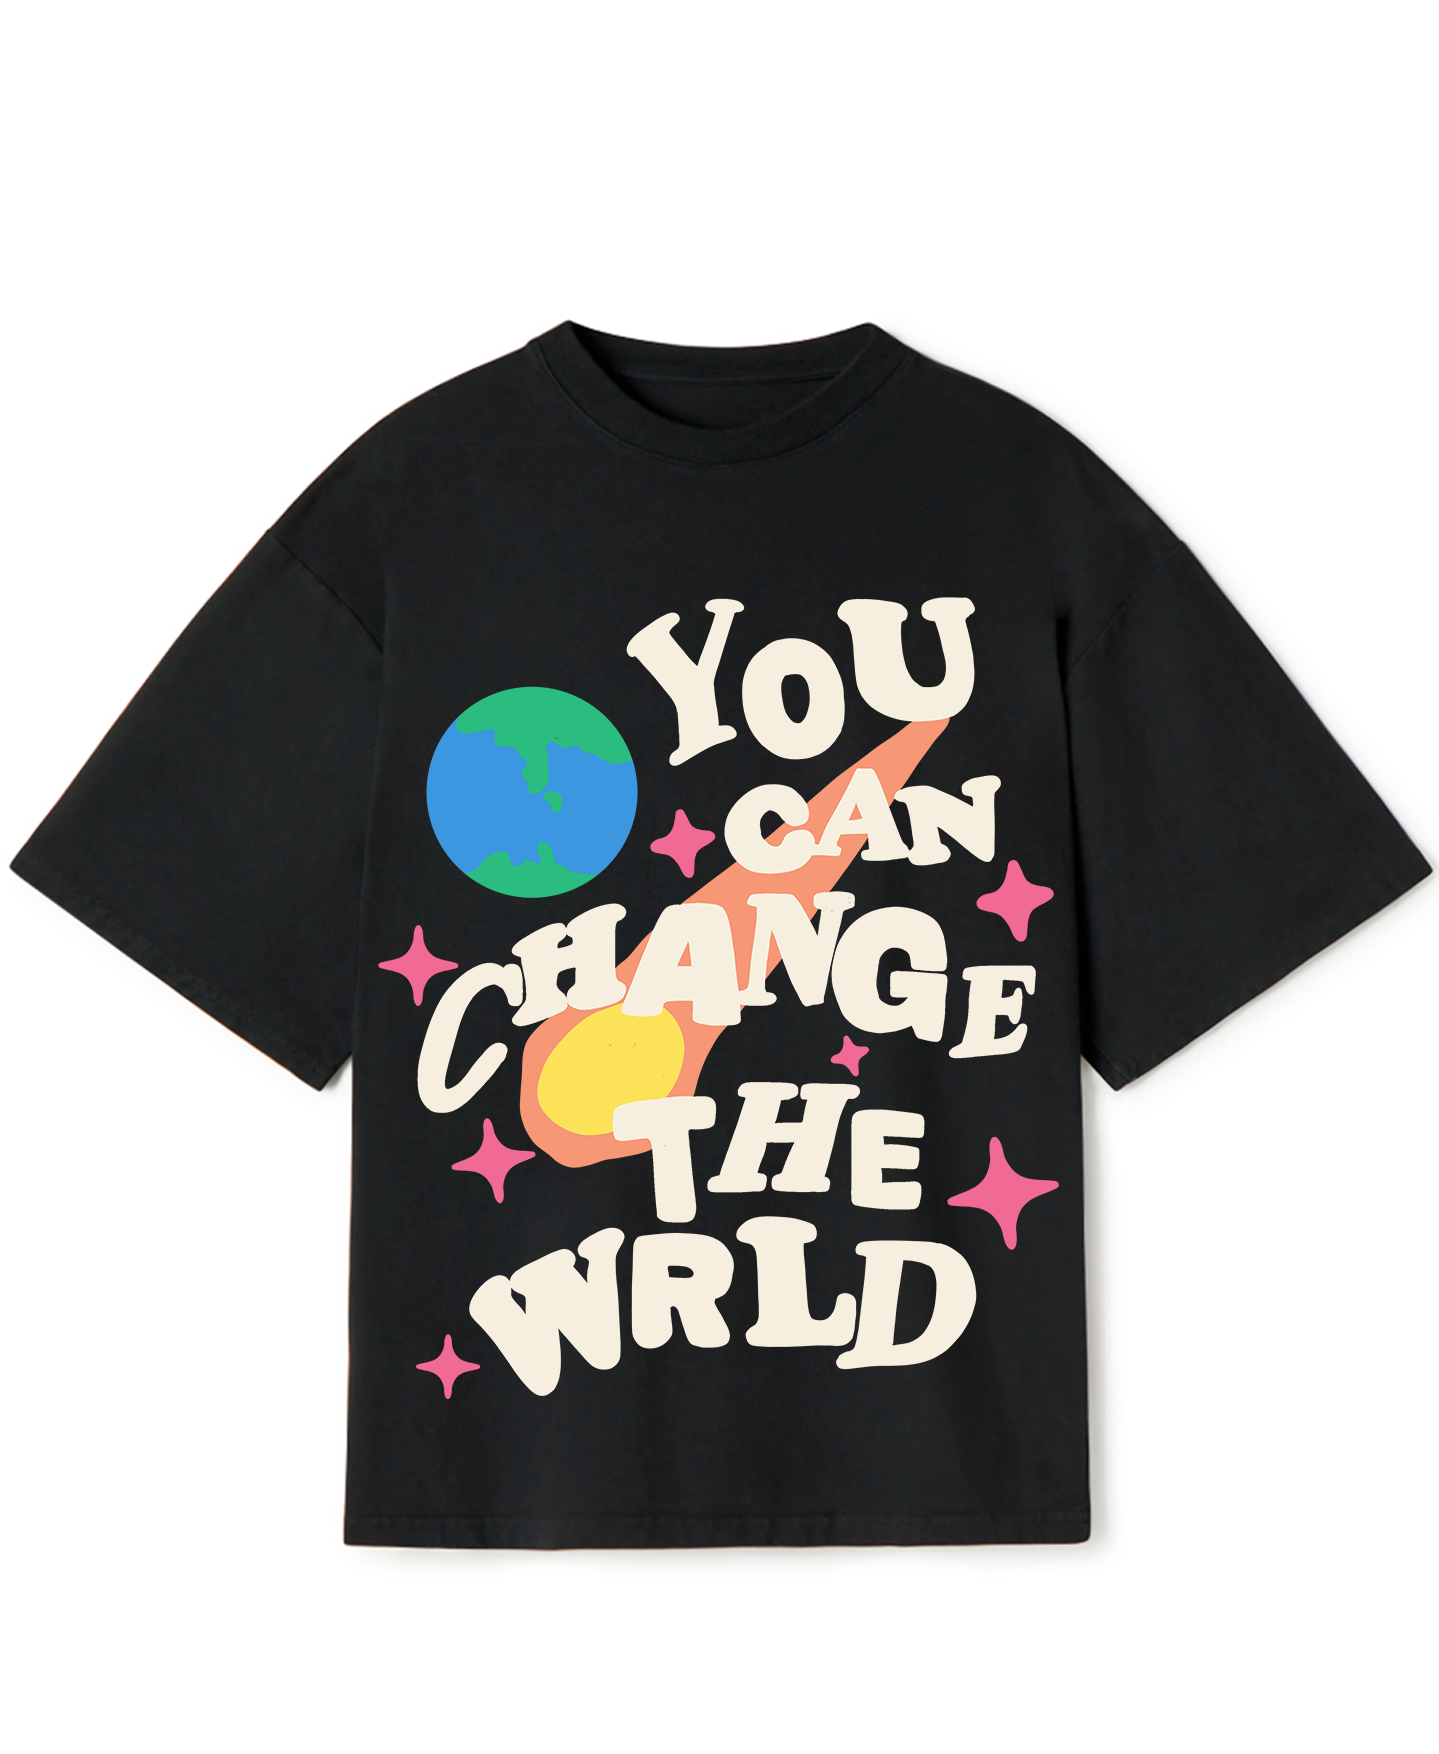 You Can Change the World Tee